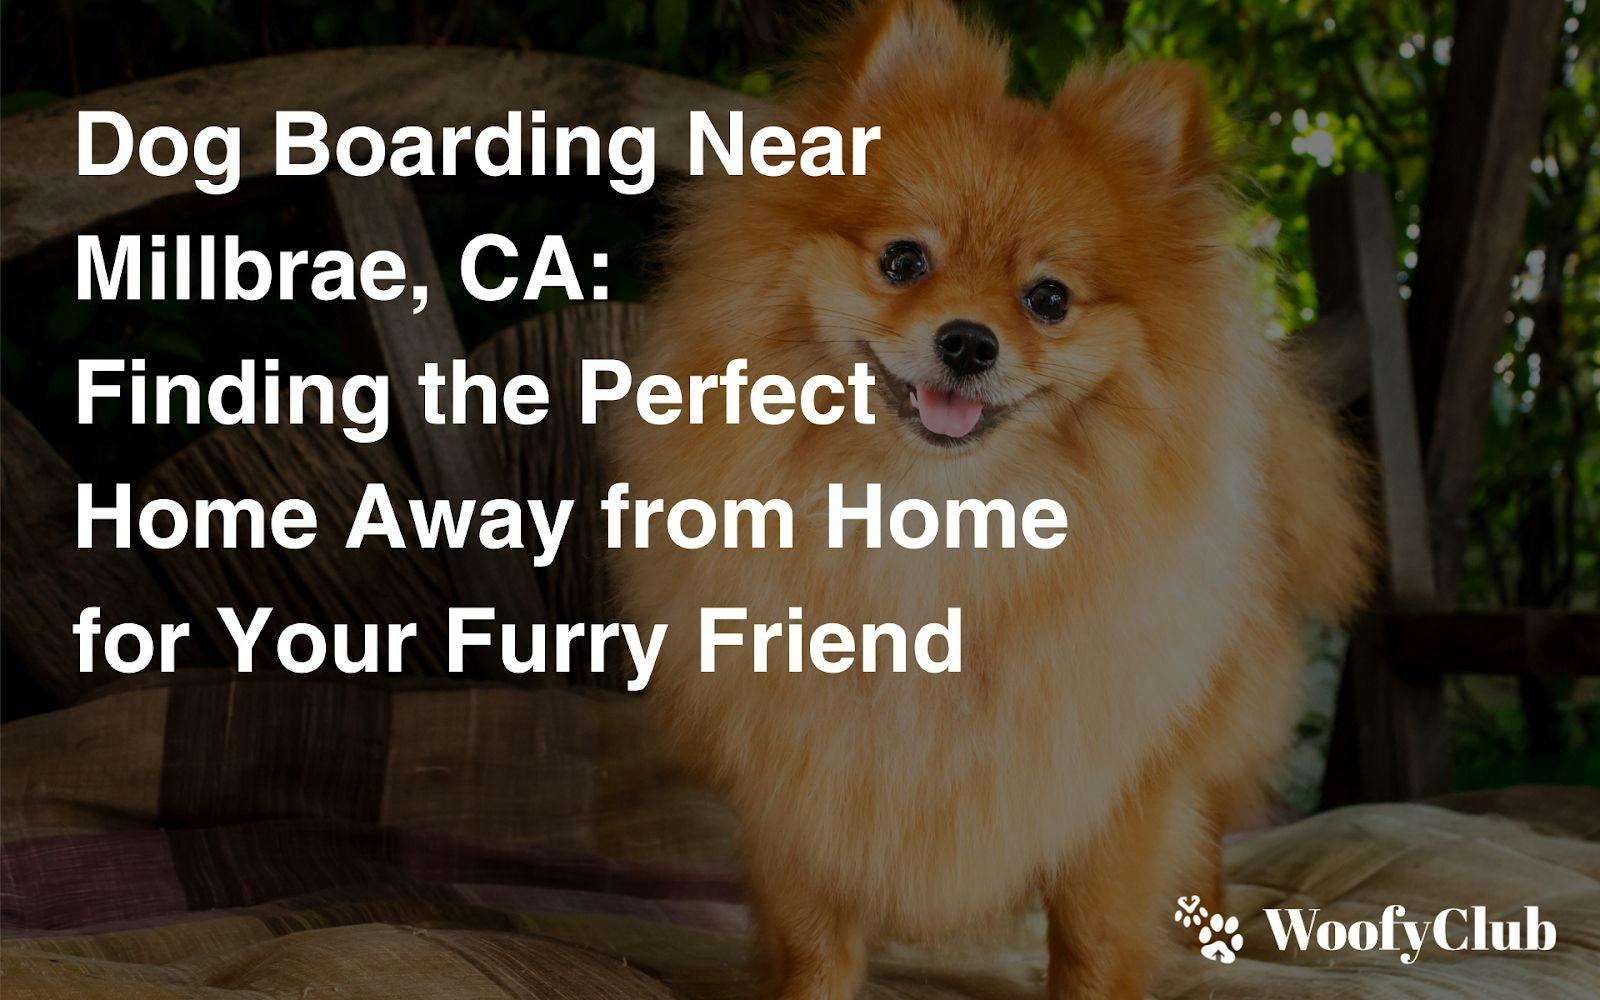 Dog Boarding Near Millbrae, CA: Finding The Perfect Home Away From Home For Your Furry Friend